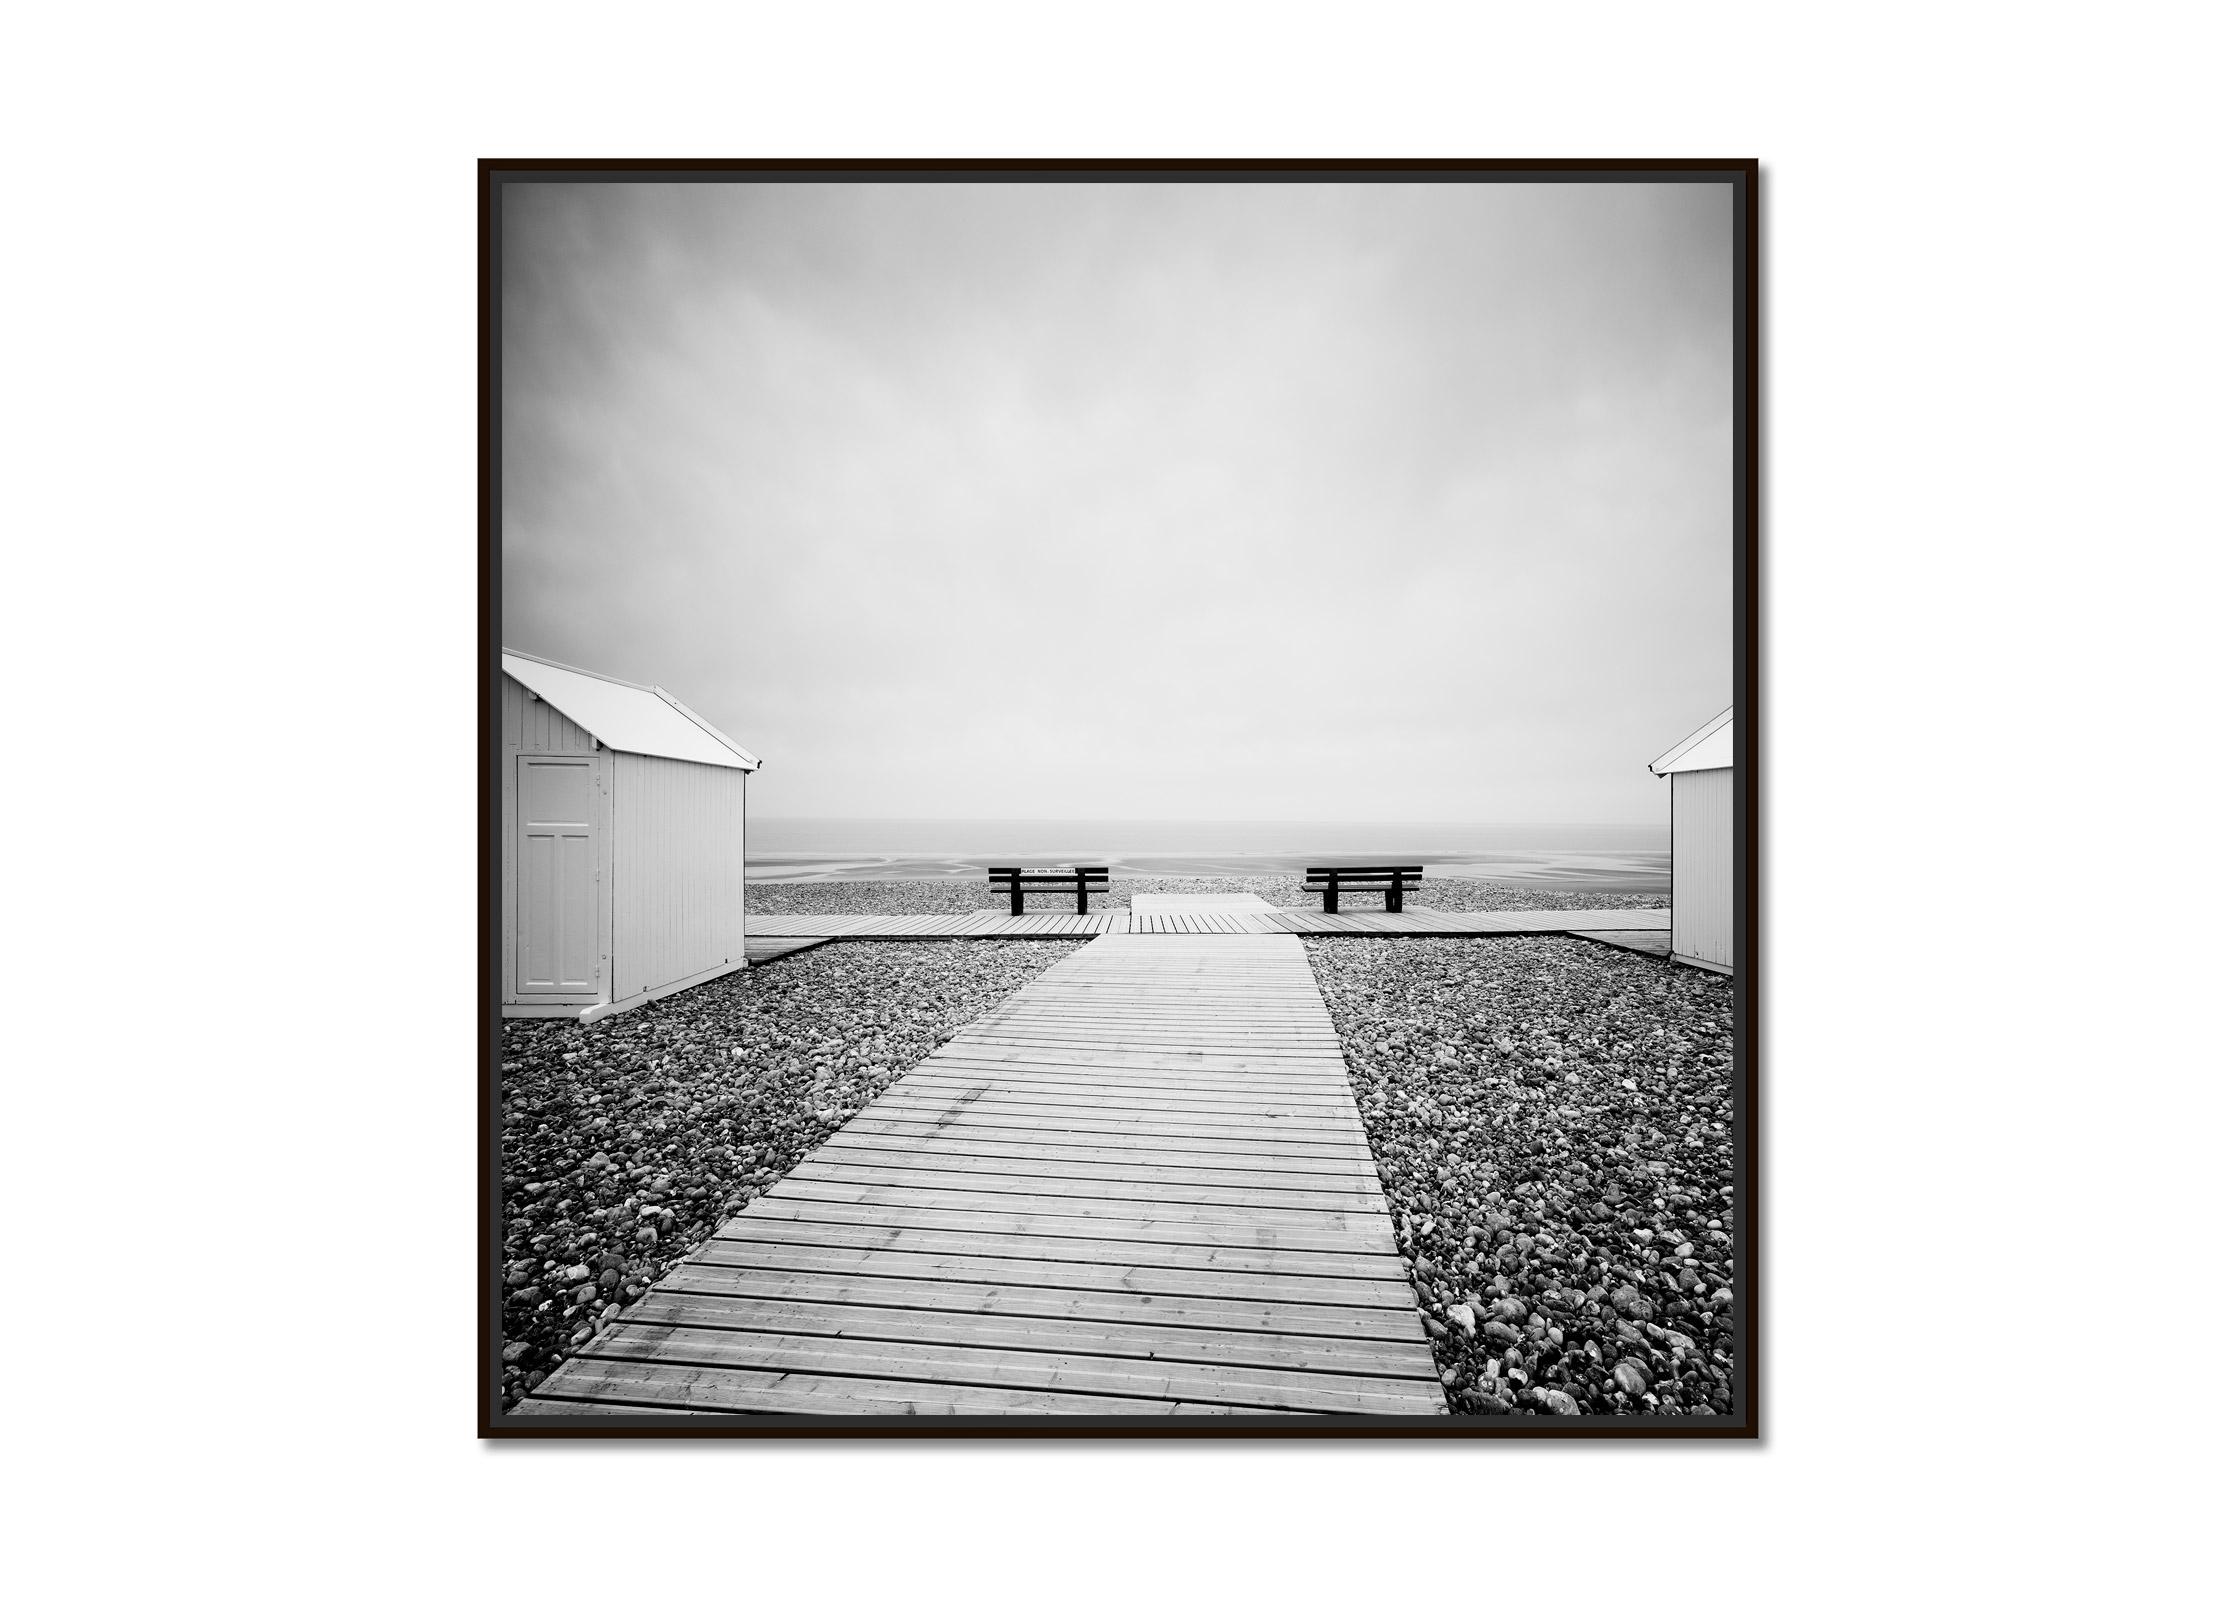 Place to linger, deserted rock beach, black and white fine art landscape print - Photograph by Gerald Berghammer